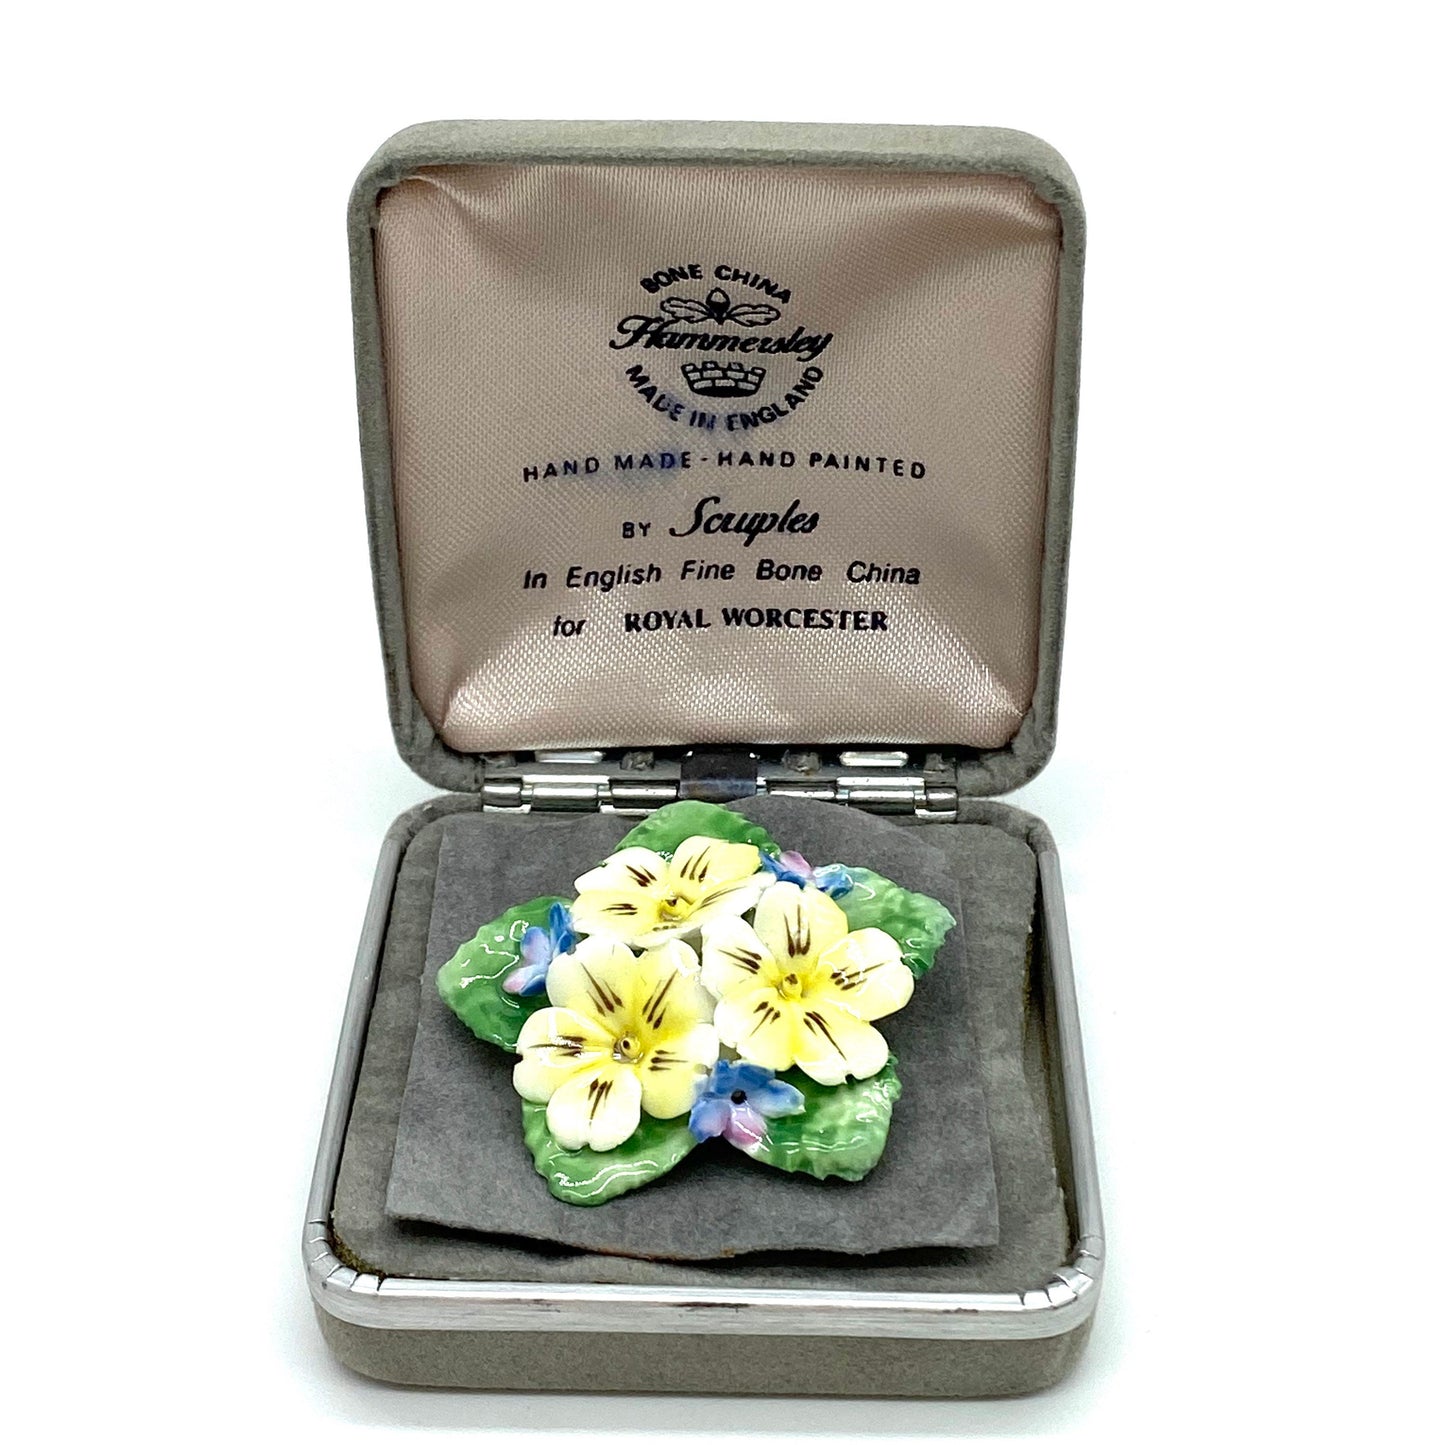 Hammersley 1970's Royal Worcester English Fine Bone China Flower Brooch Hand Made and Hand Painted by Scruples in Original Box